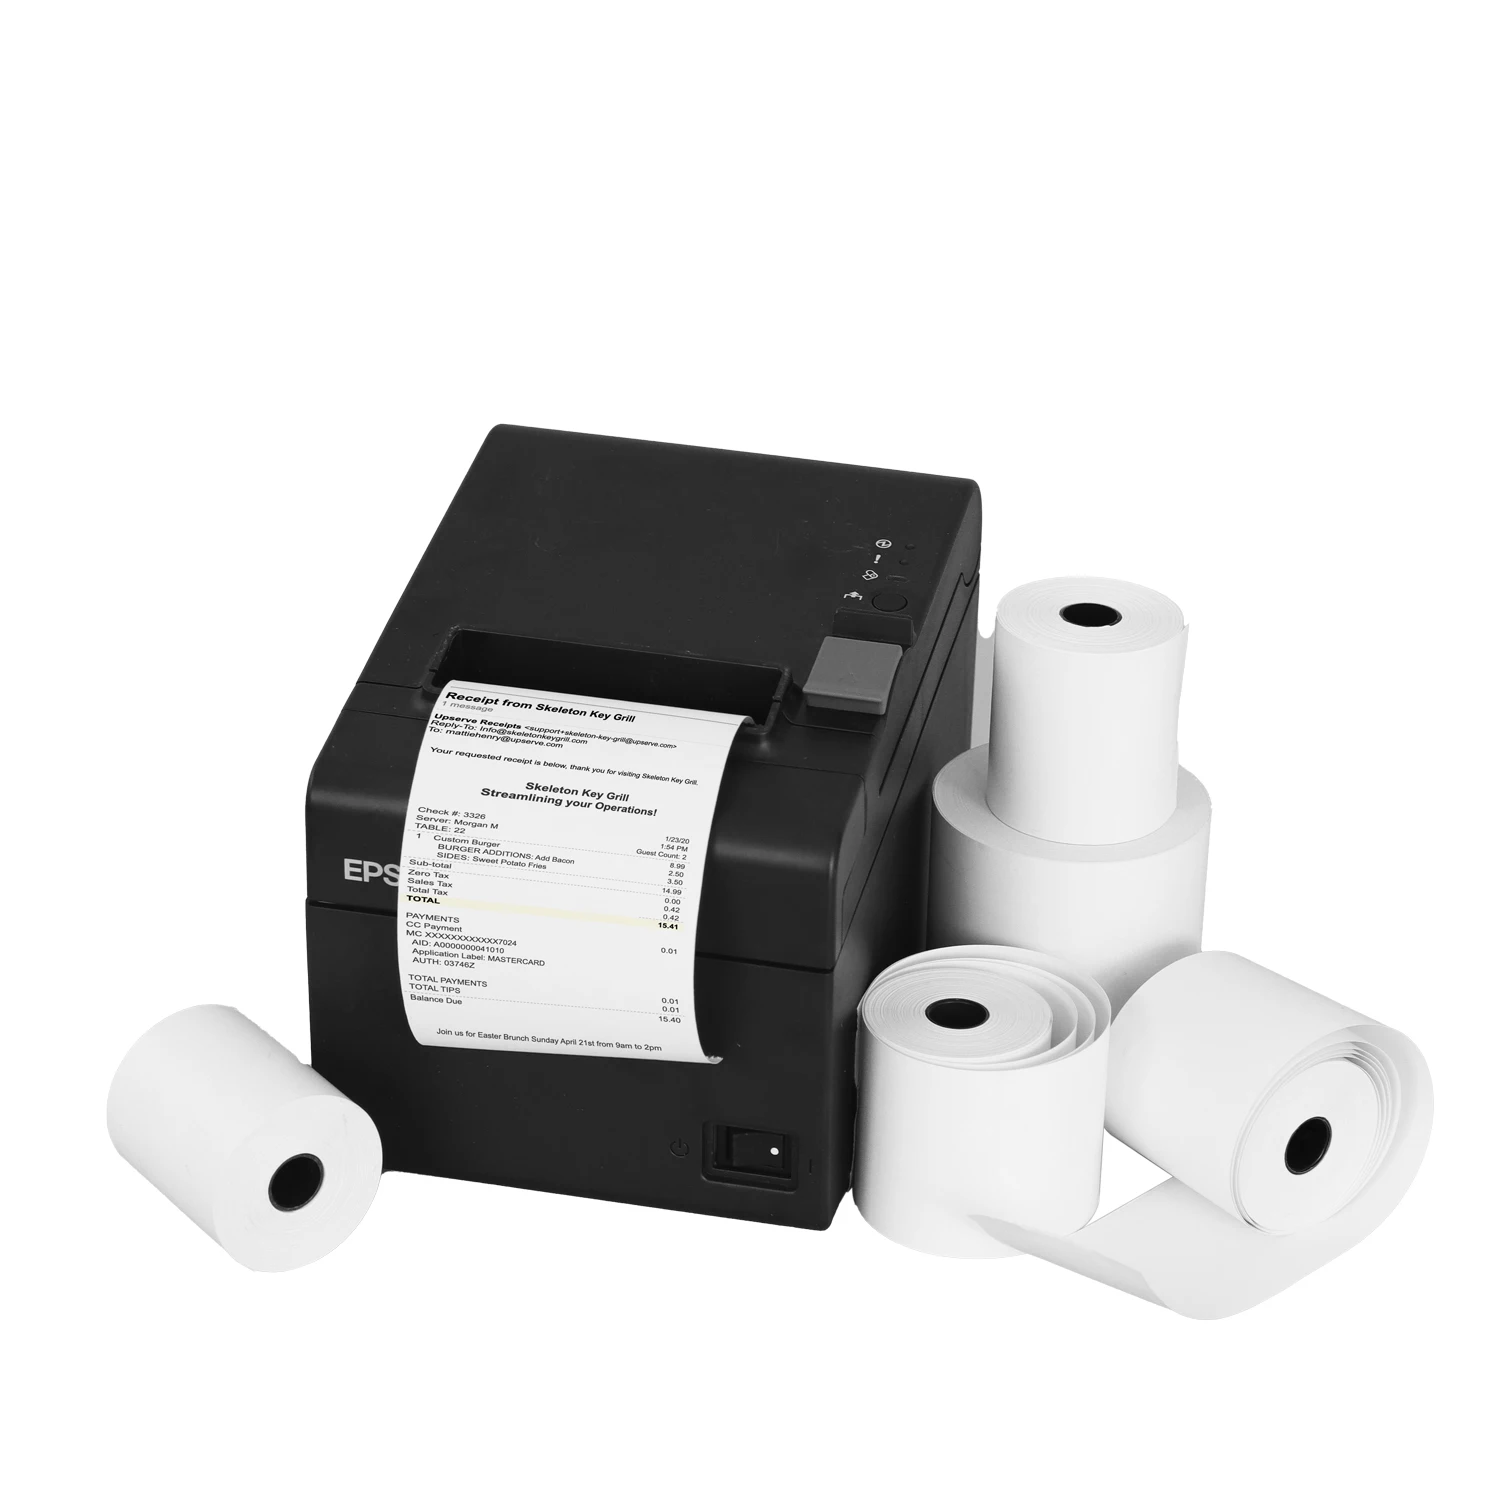 China Manufacturers Factory Price Thermal Paper roll 57 X 40 80x80 Thermal Paper roll